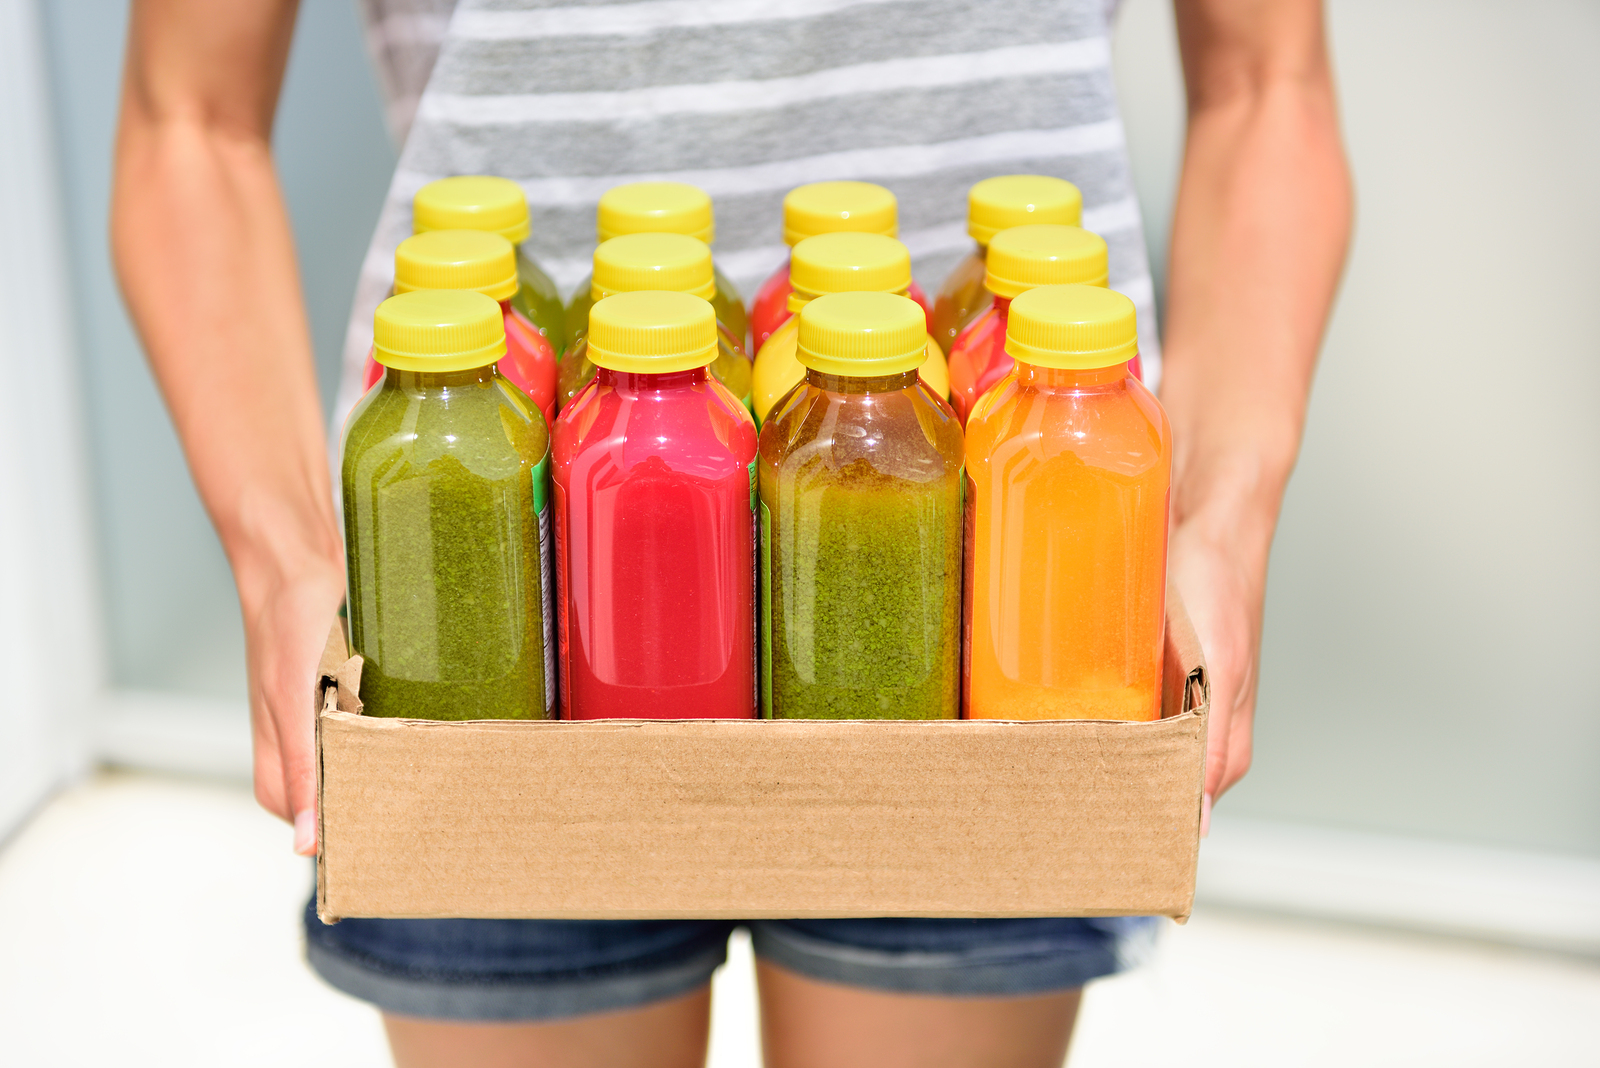 Juicing cold pressed vegetable juices for a detox diet. Dieting by cleansing your body from toxins with raw organic fruits and vegetables juice made fresh and delivered in bottles.